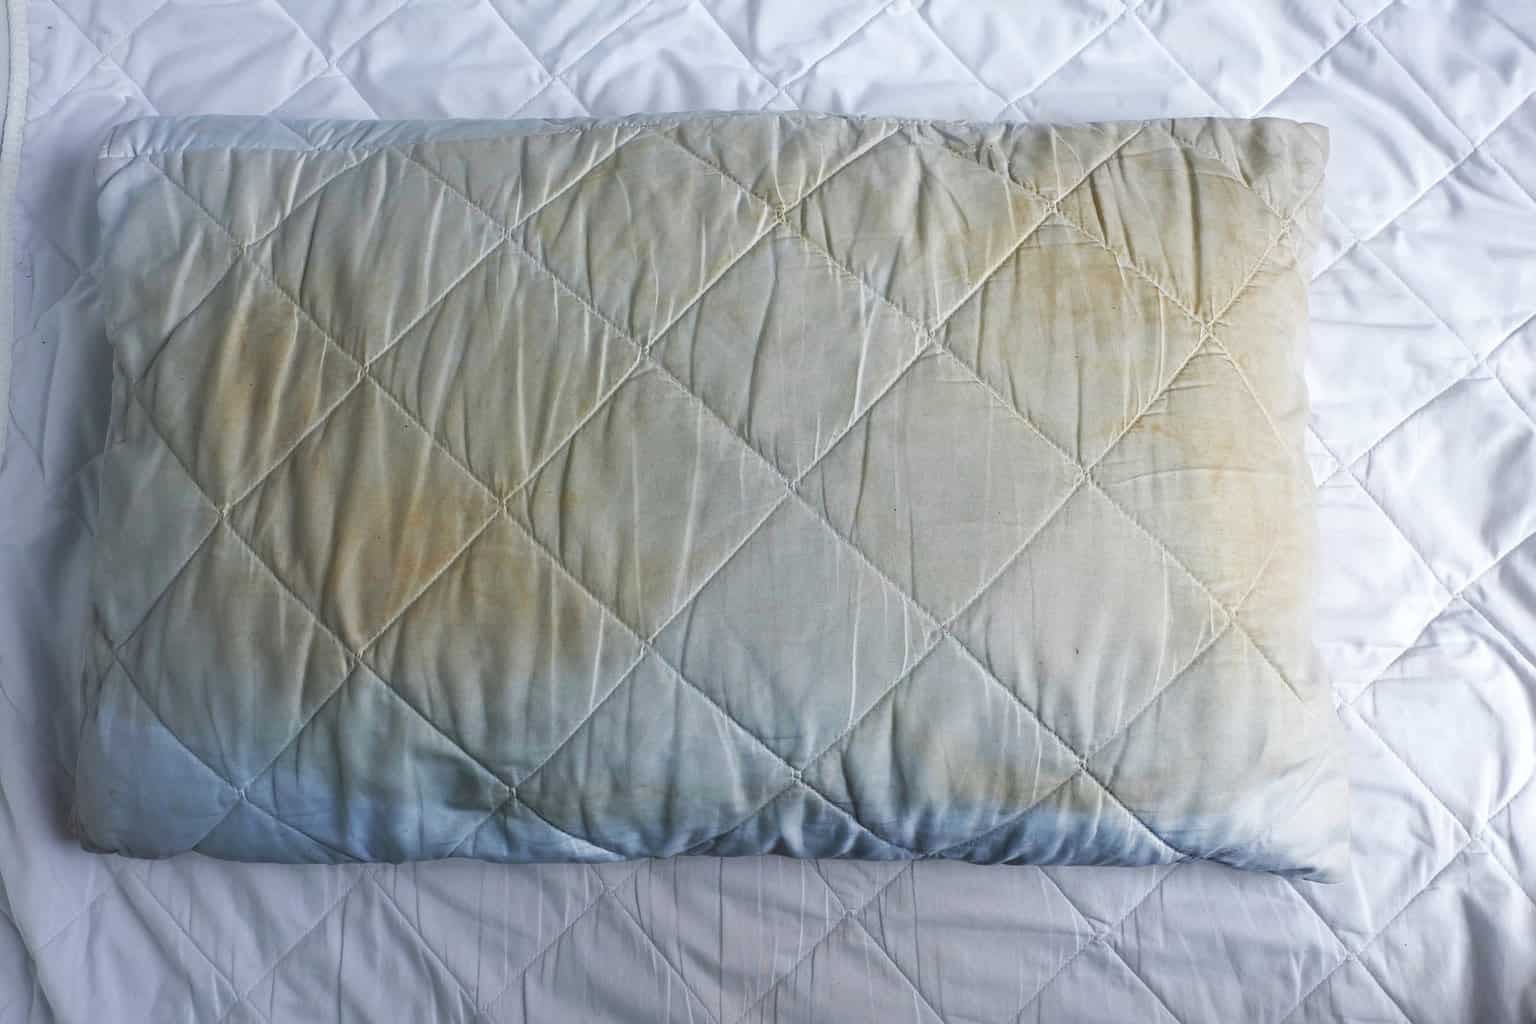 old stained pillow on bed